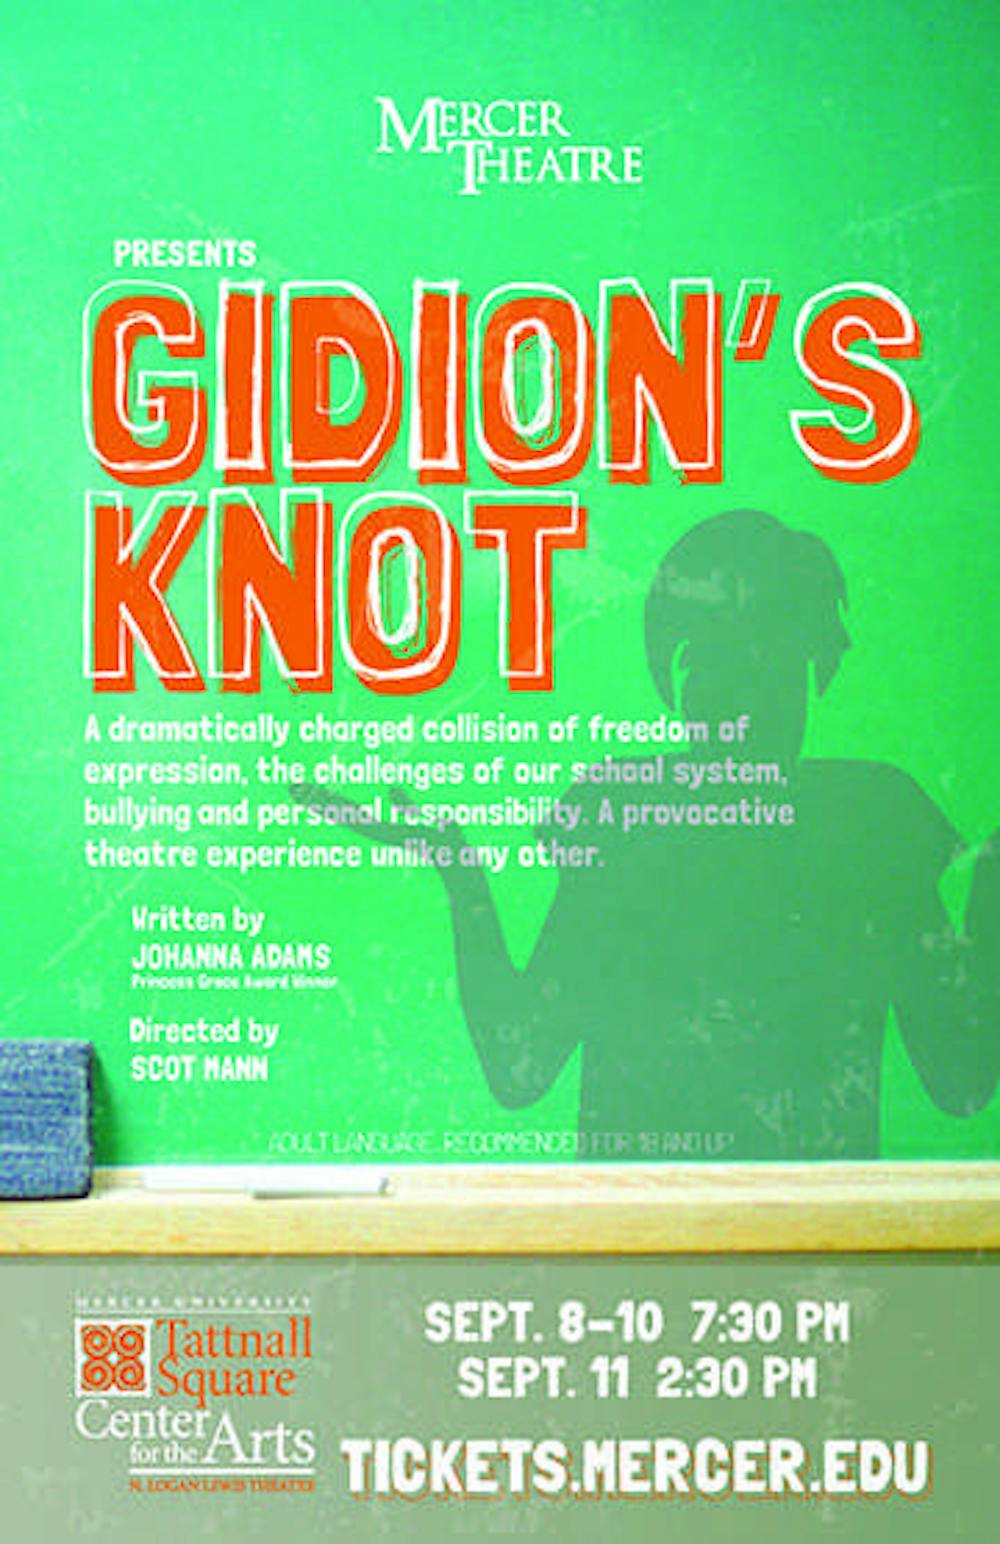 Mercer Theatre will soon perform Gidion's Knot, a play that discusses the collision of freedom of expression, bullying, and personal responsibility.